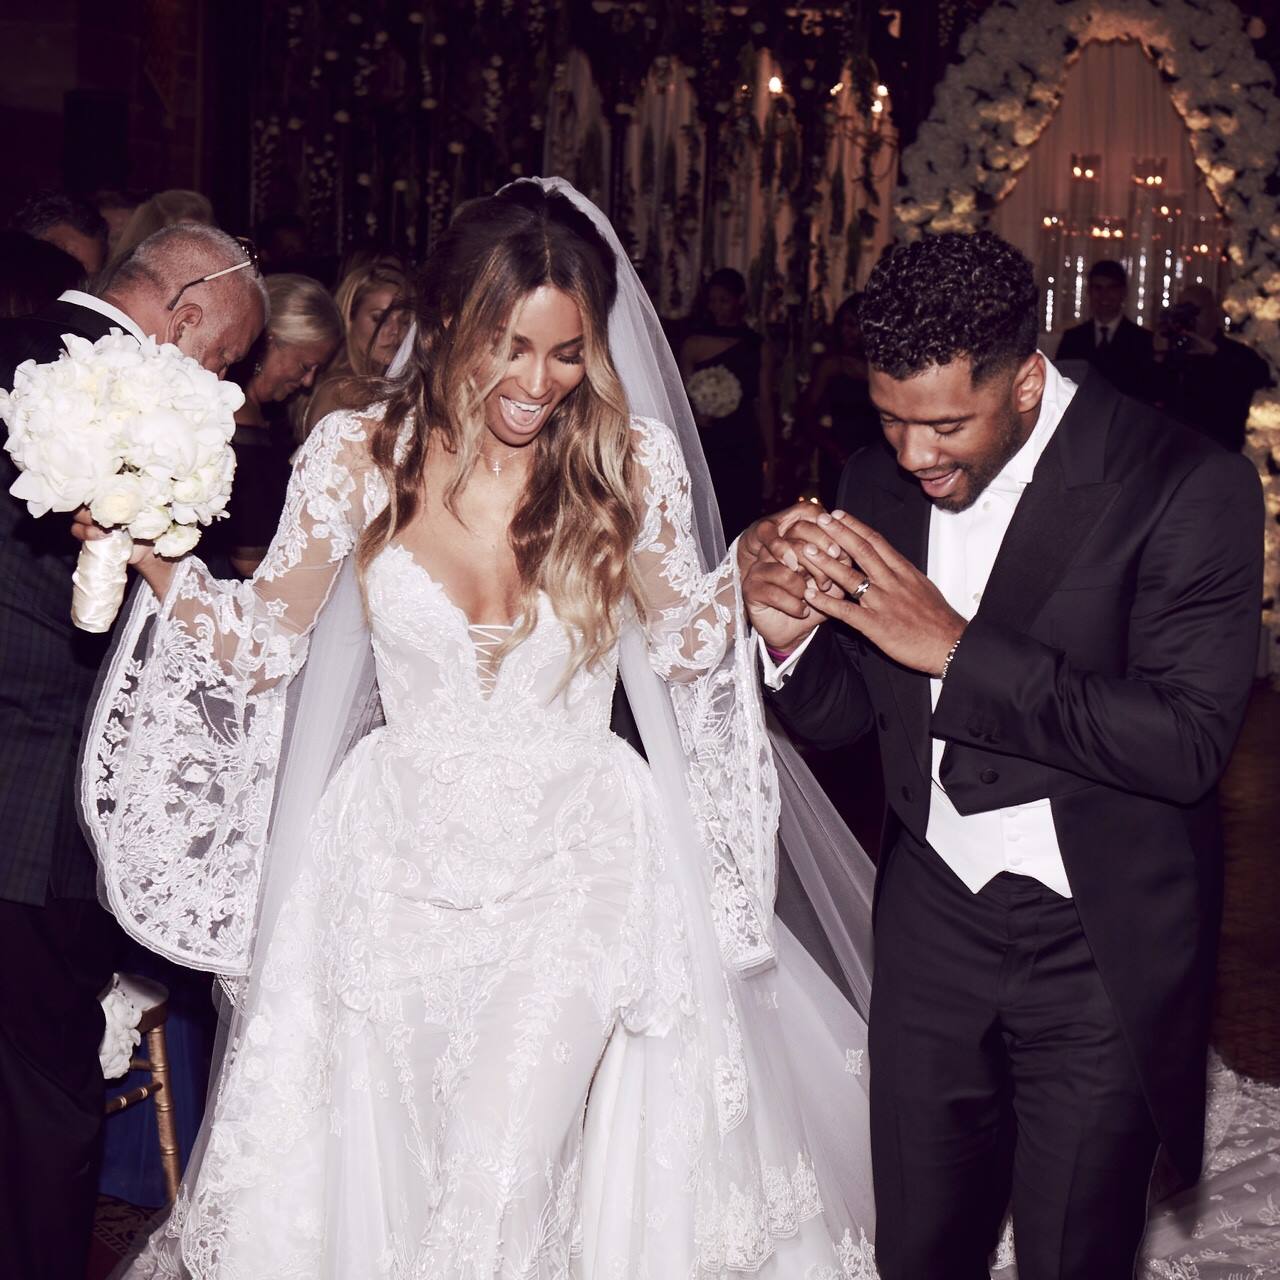 Russell Wilson and Ciara during their marriage ceremony